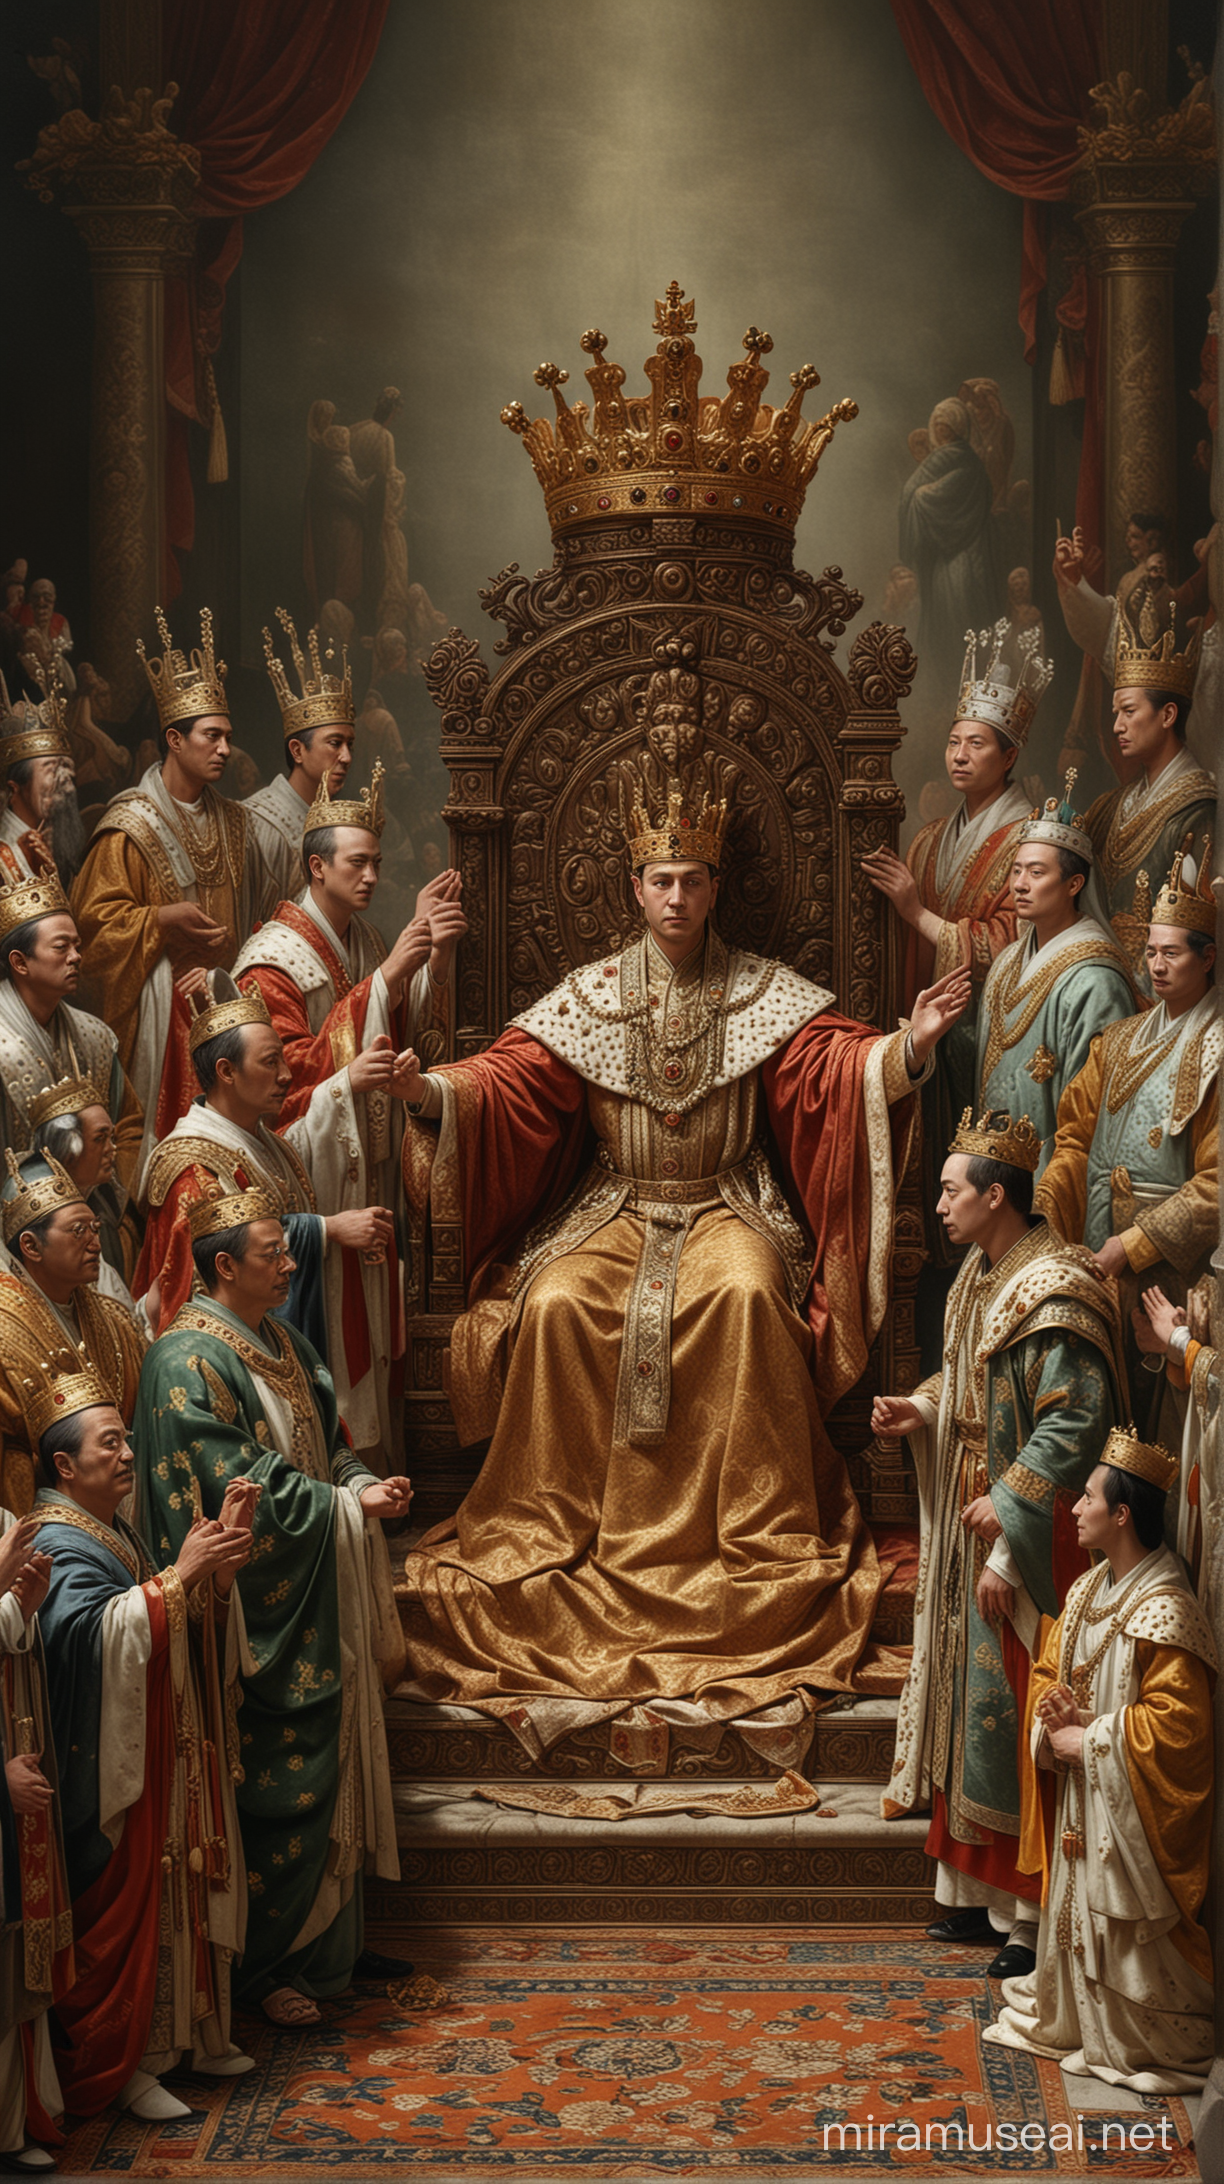 Ceremonial Crowning of a Young Emperor Surrounded by Court Officials Hyper Realistic Art